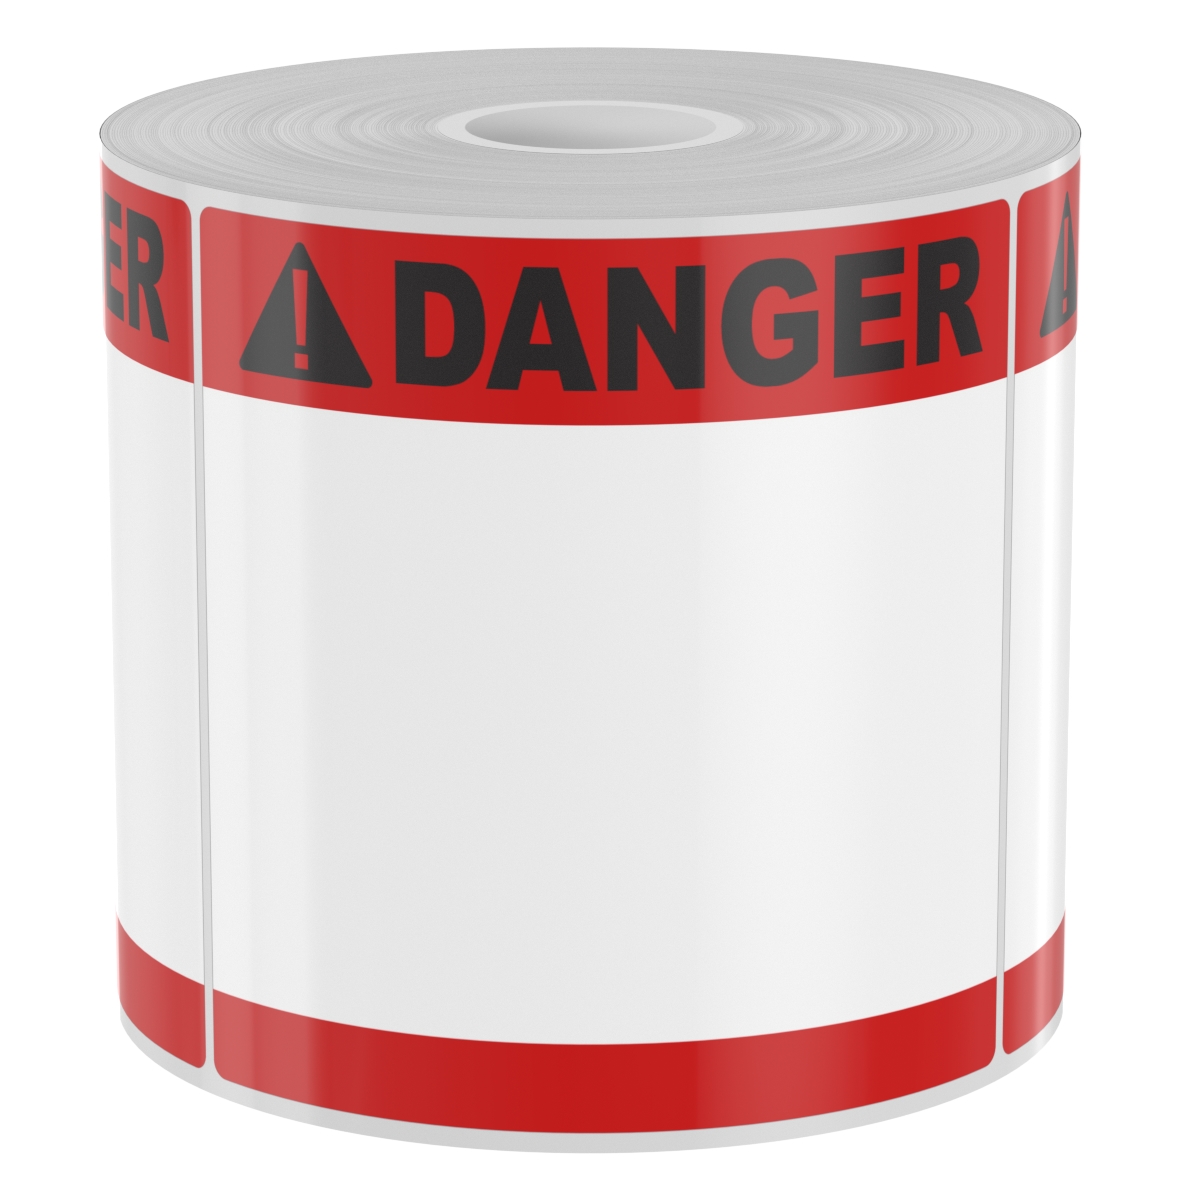 Ask a question about 250 4" x 4" High-Performance Red Double Band with Black Danger